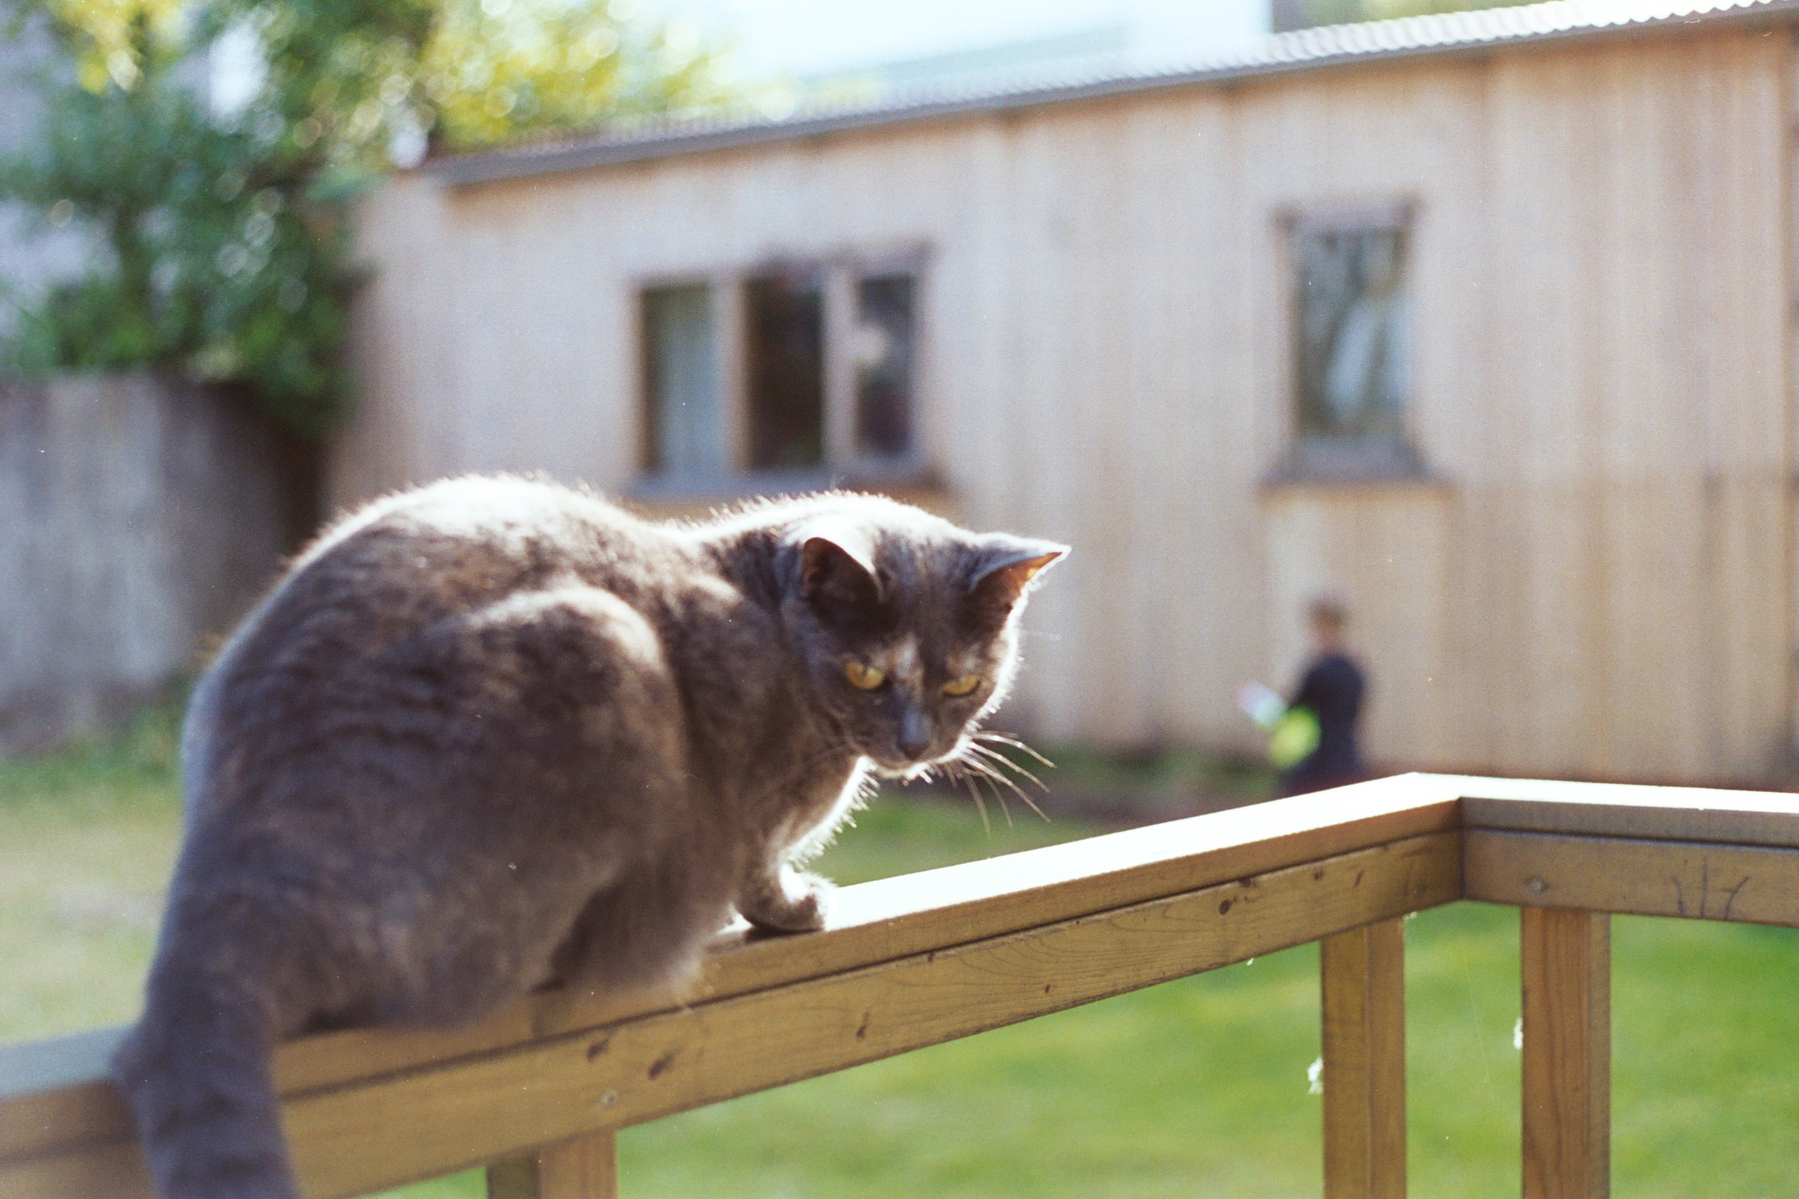 A sunny day. A gray cat is loafing on a porch railing, looking back and the camera